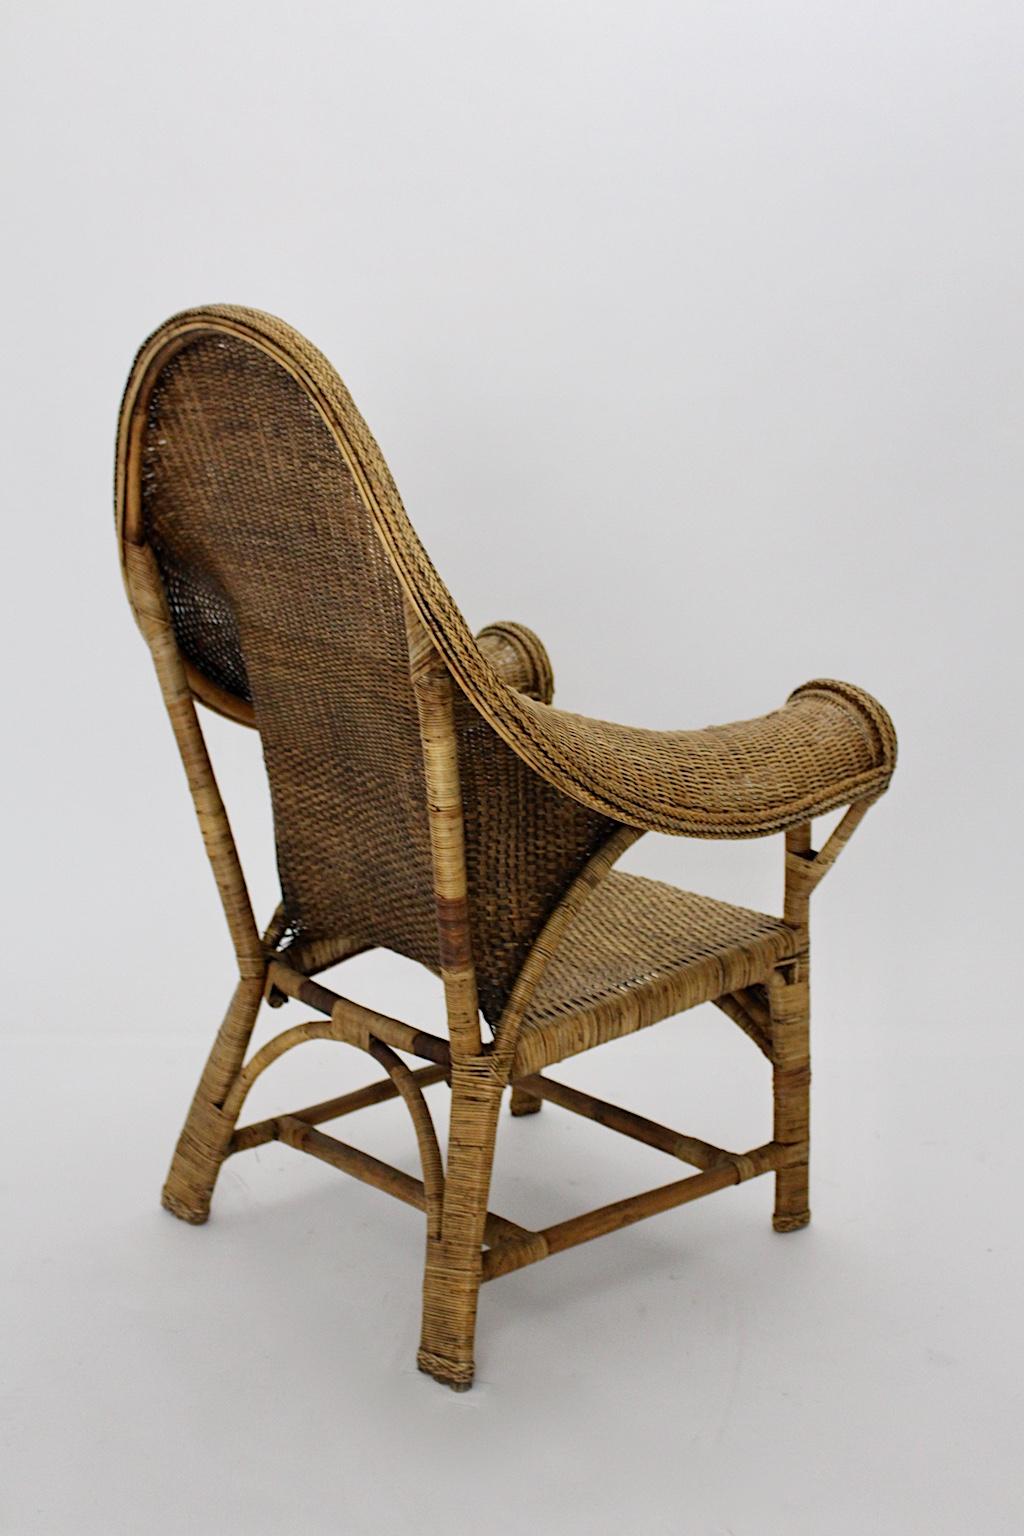 Arts and Crafts Organic Arts & Crafts Vintage Wicker Rattan Armchair Dryad and Co circa 1910 UK For Sale